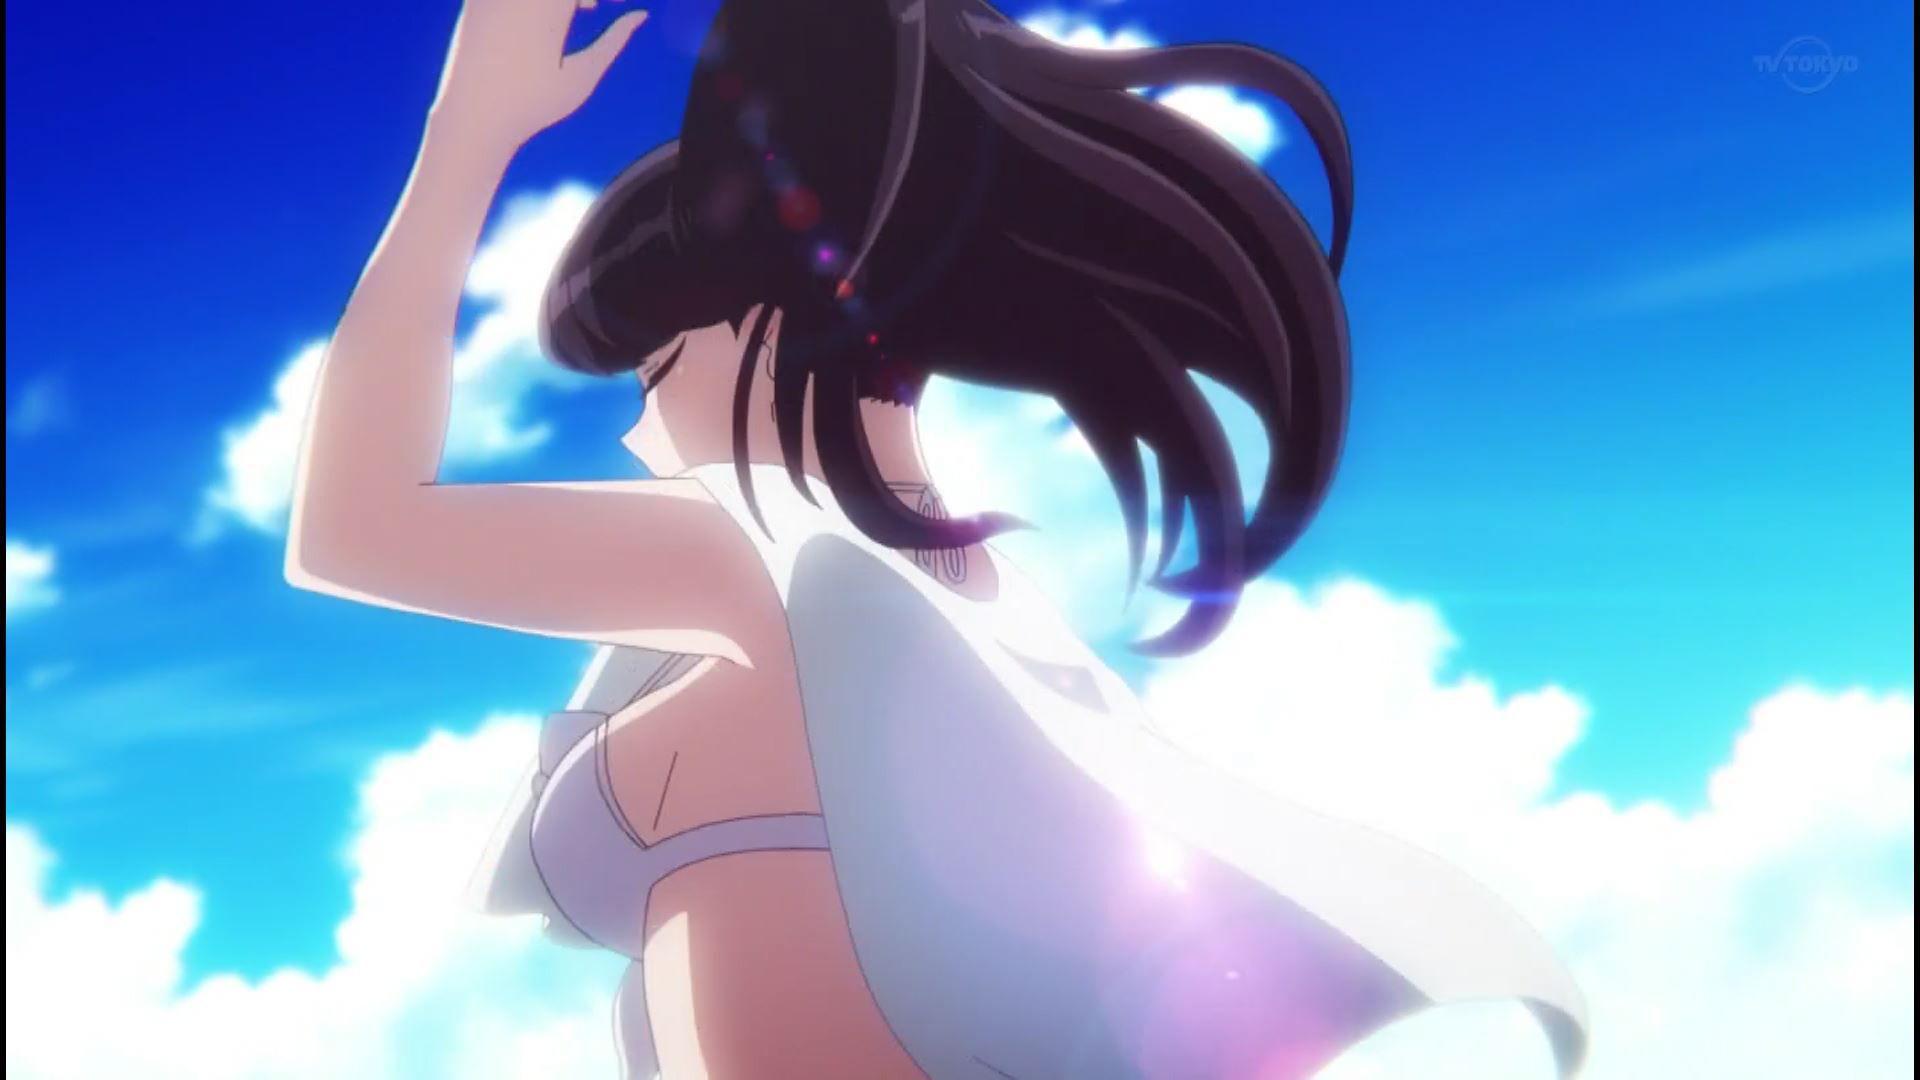 In episode 7 of the anime "Komi-san is a communicator," the swimsuits of girls with erotic! 10